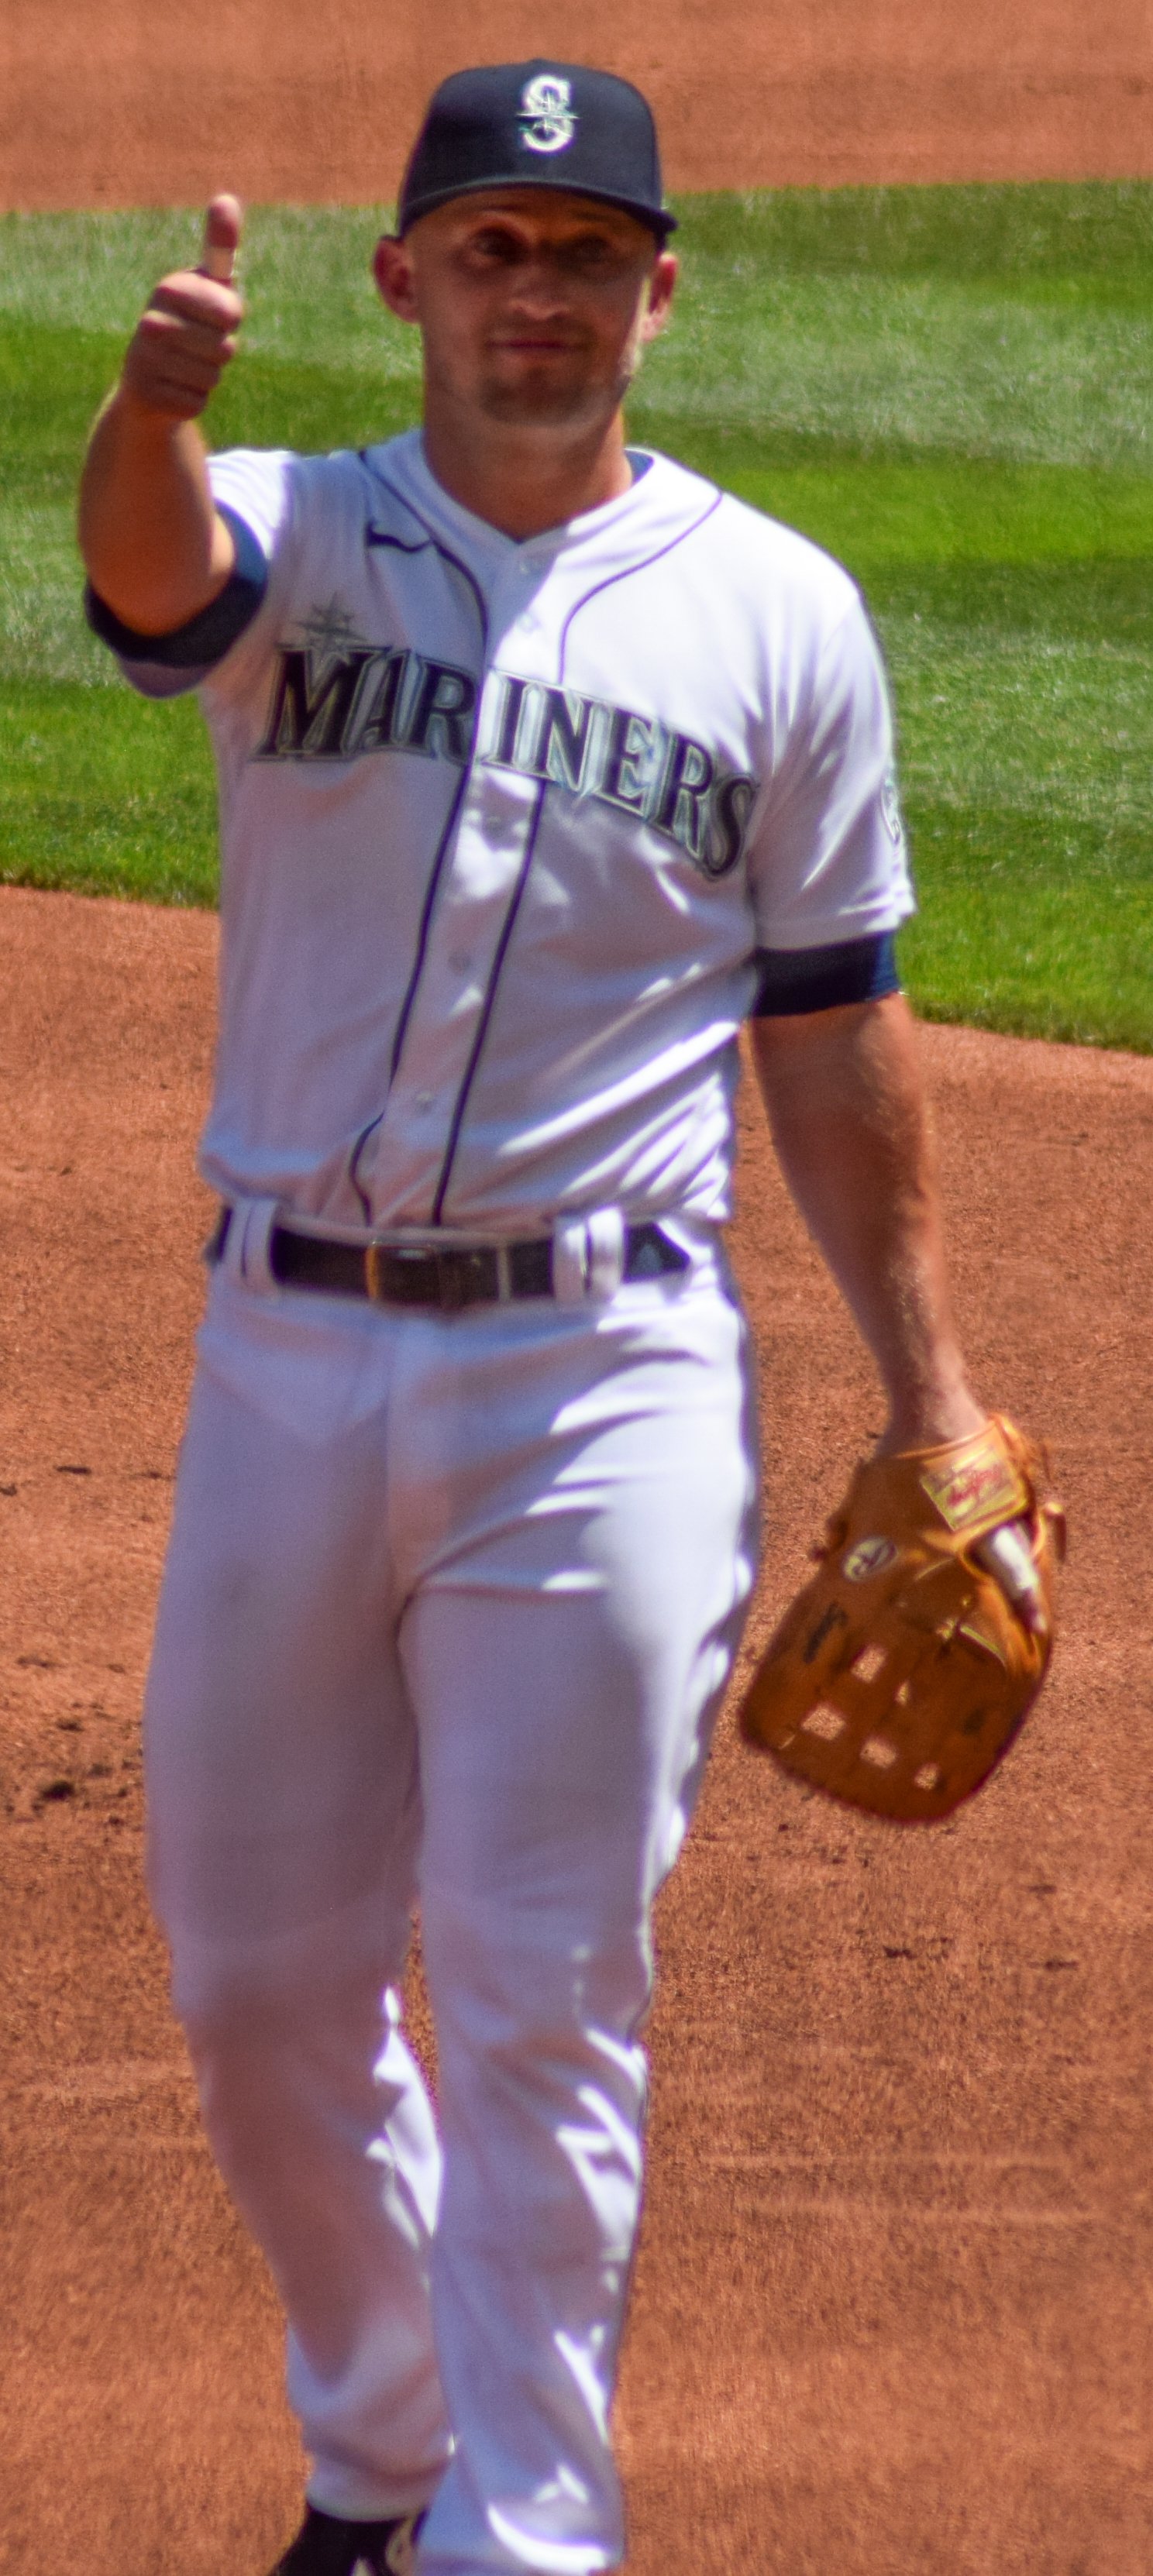 File:Kyle Seager (51269521429) (cropped).jpg - Wikimedia Commons